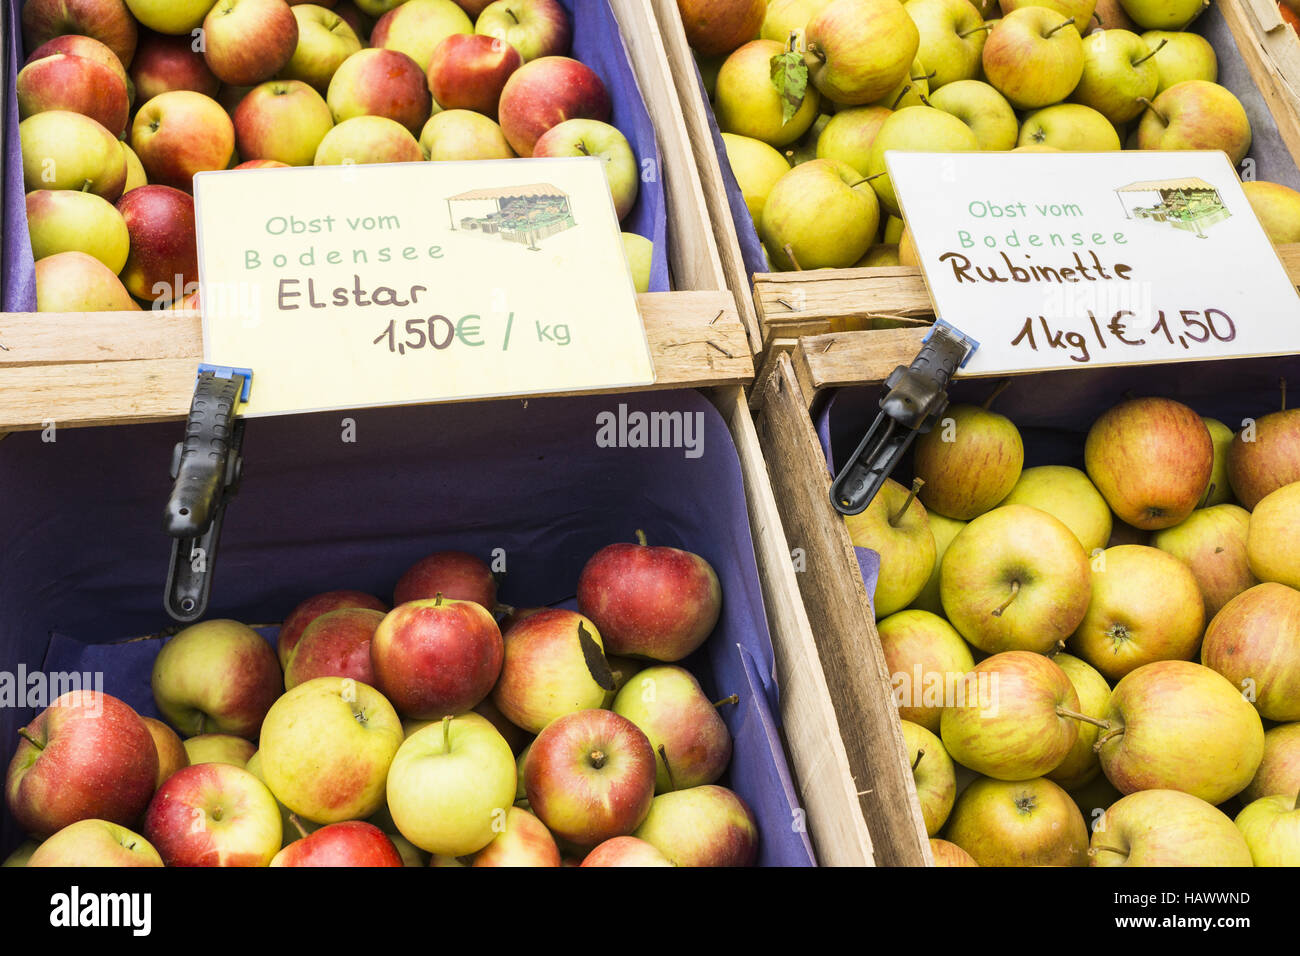 apples from lake constance region Stock Photo